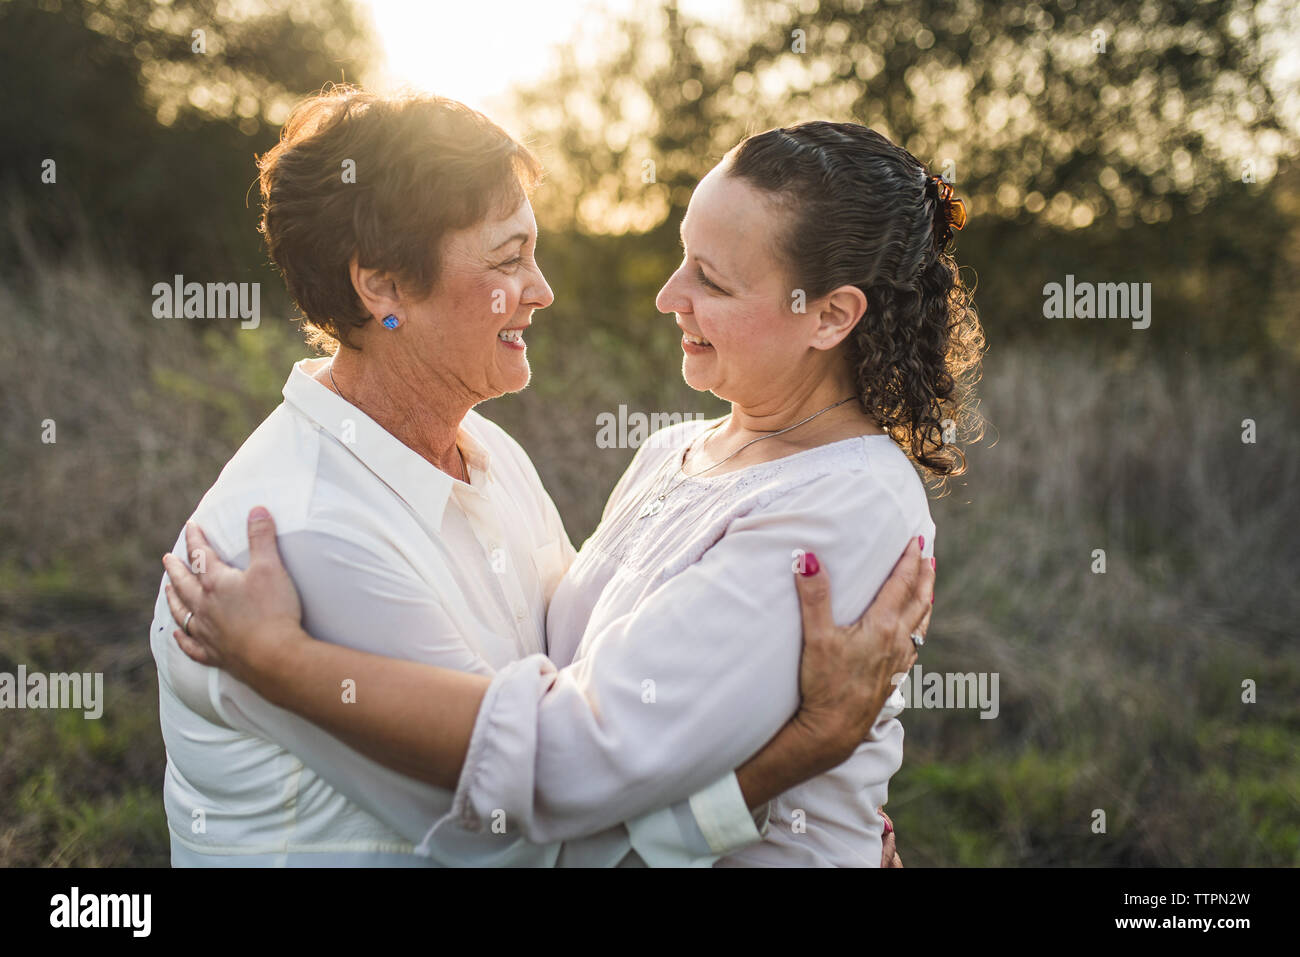 Close up portrait of adult mother and daughter embracing and smiling Stock Photo